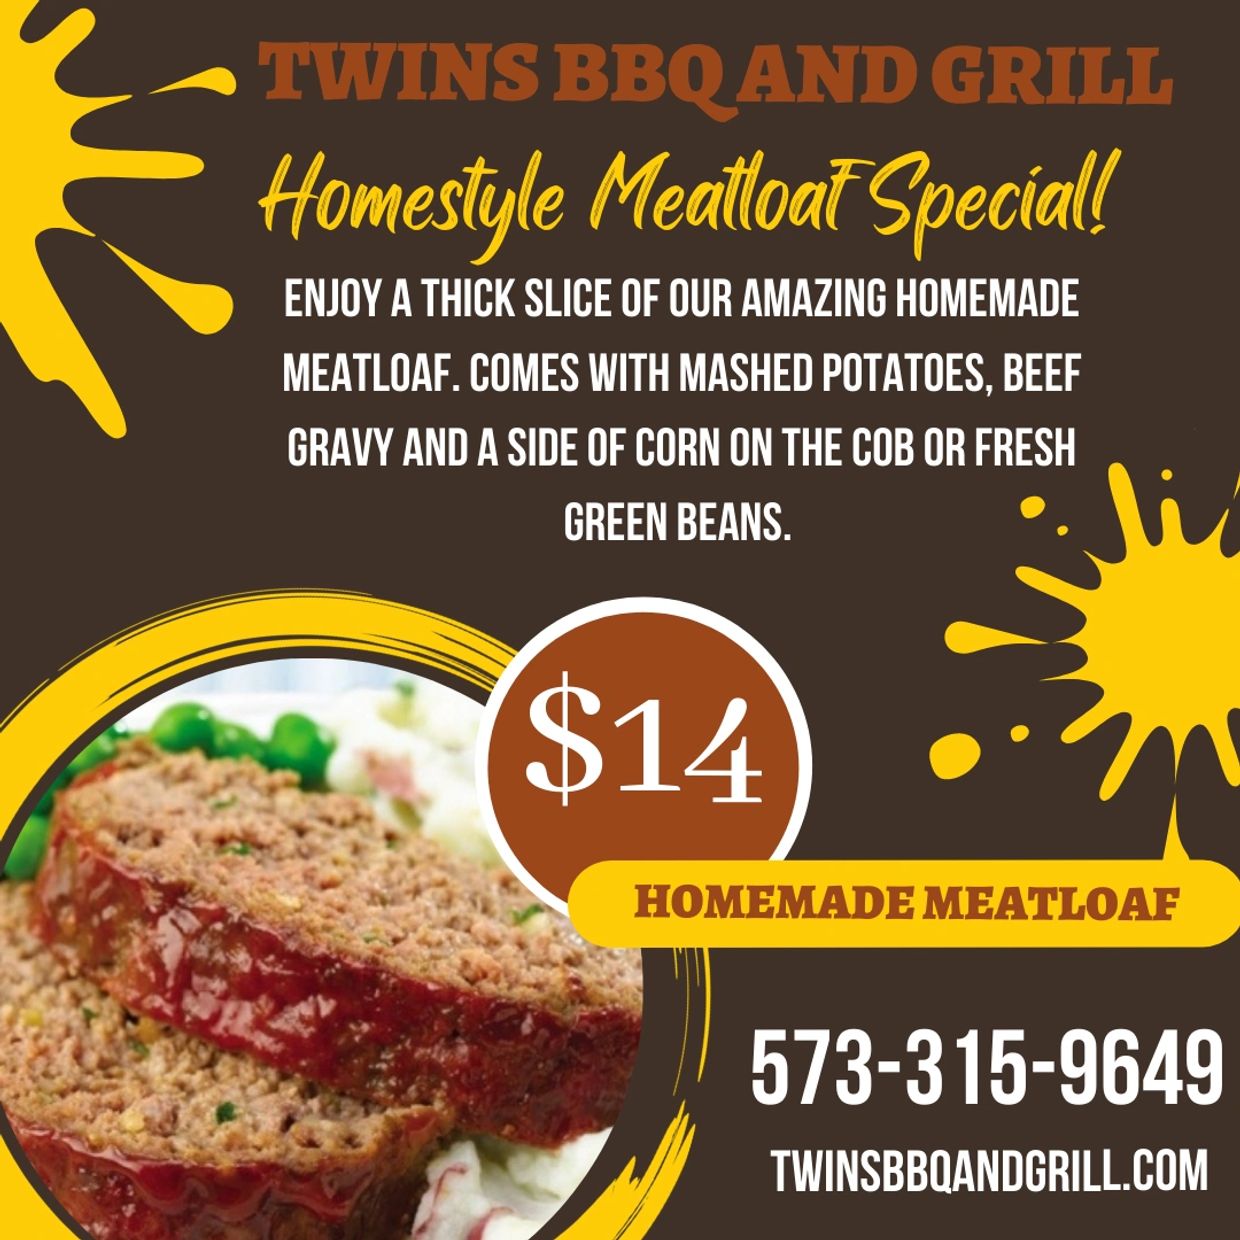 Come in every Thursday at Twins BBQ And Grill in Farmington Missouri for home style meatloaf. 